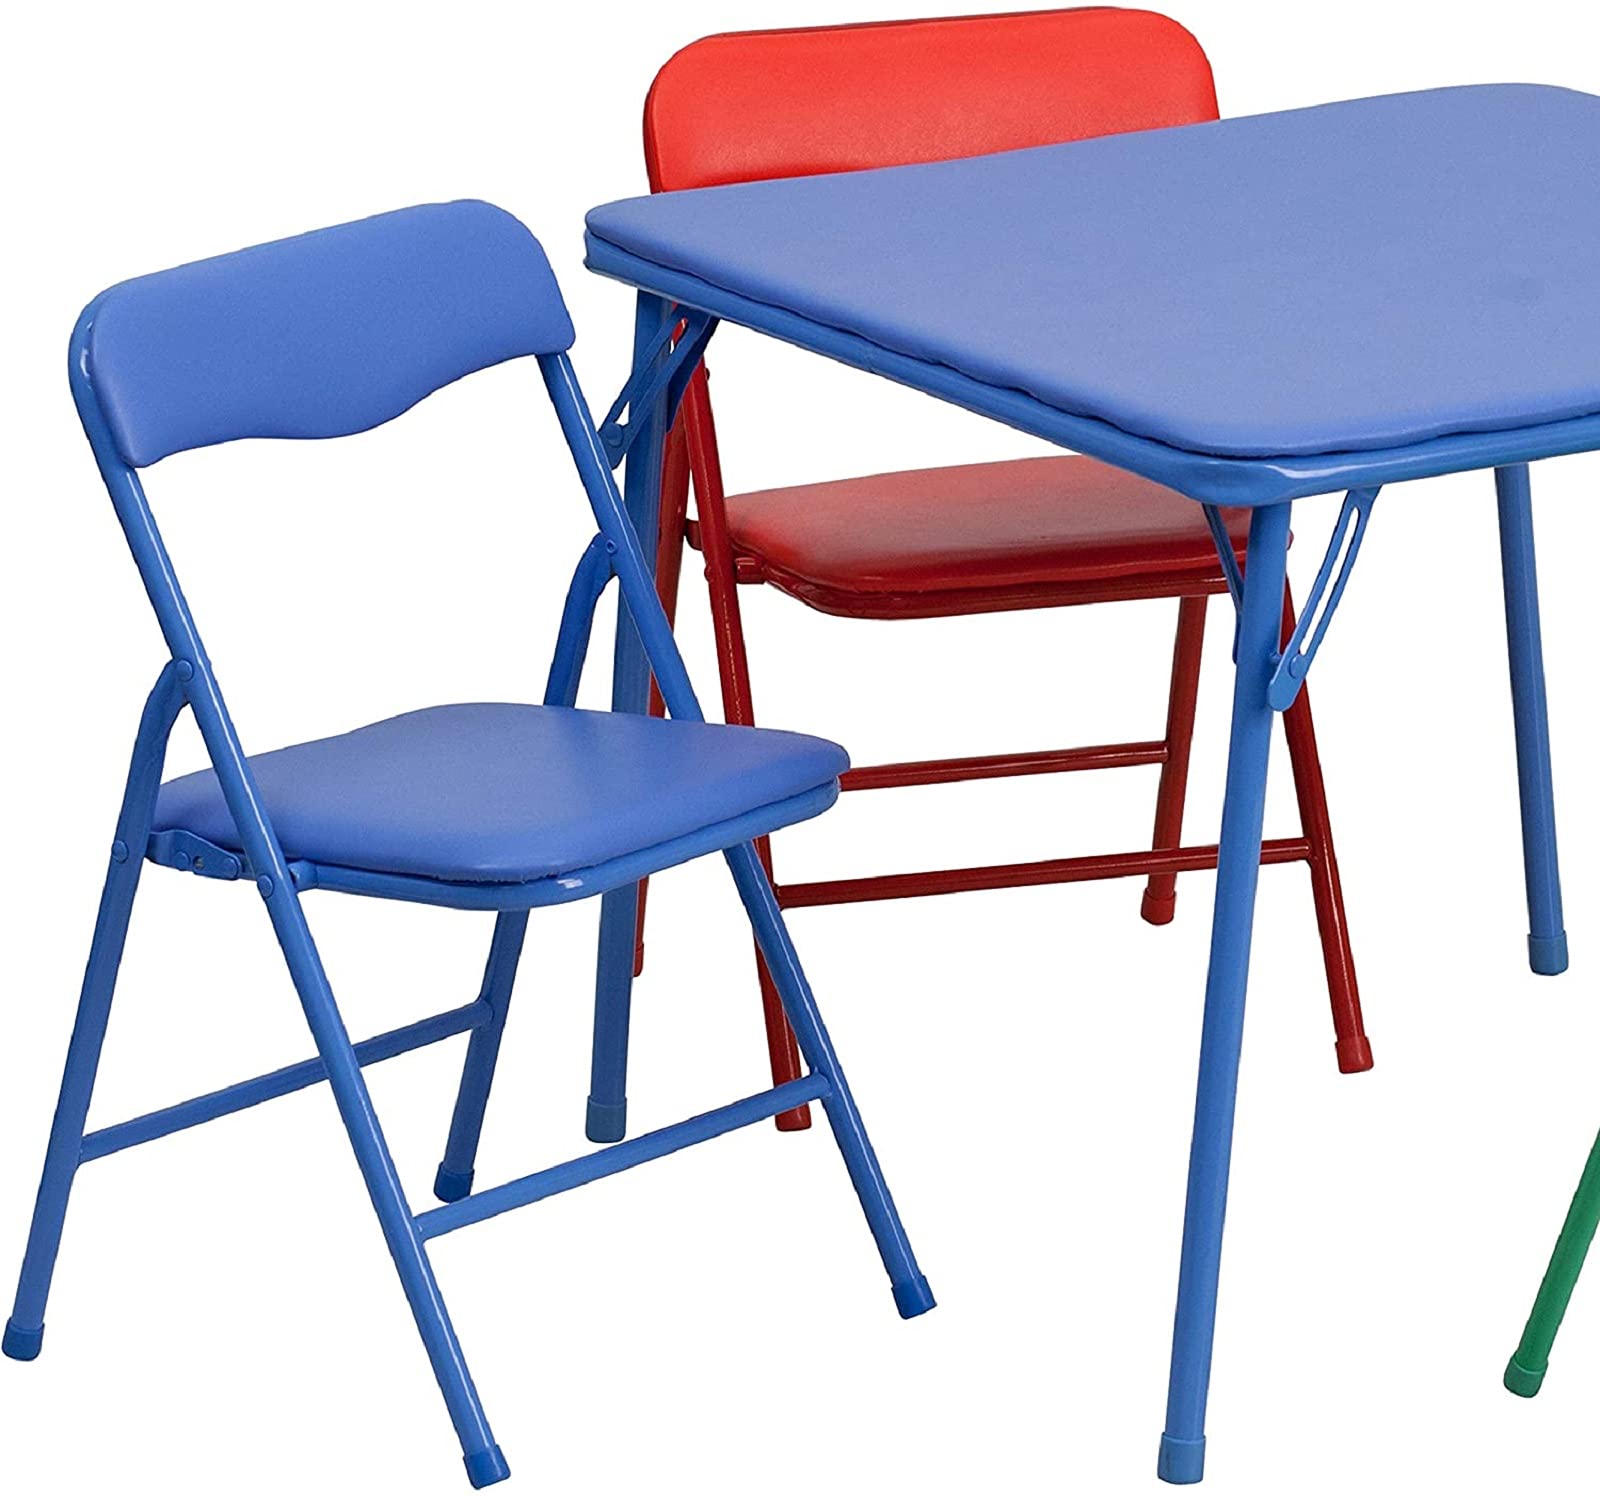 Flash Furniture Kids Colorful 5 Piece Folding Table and Chair Set